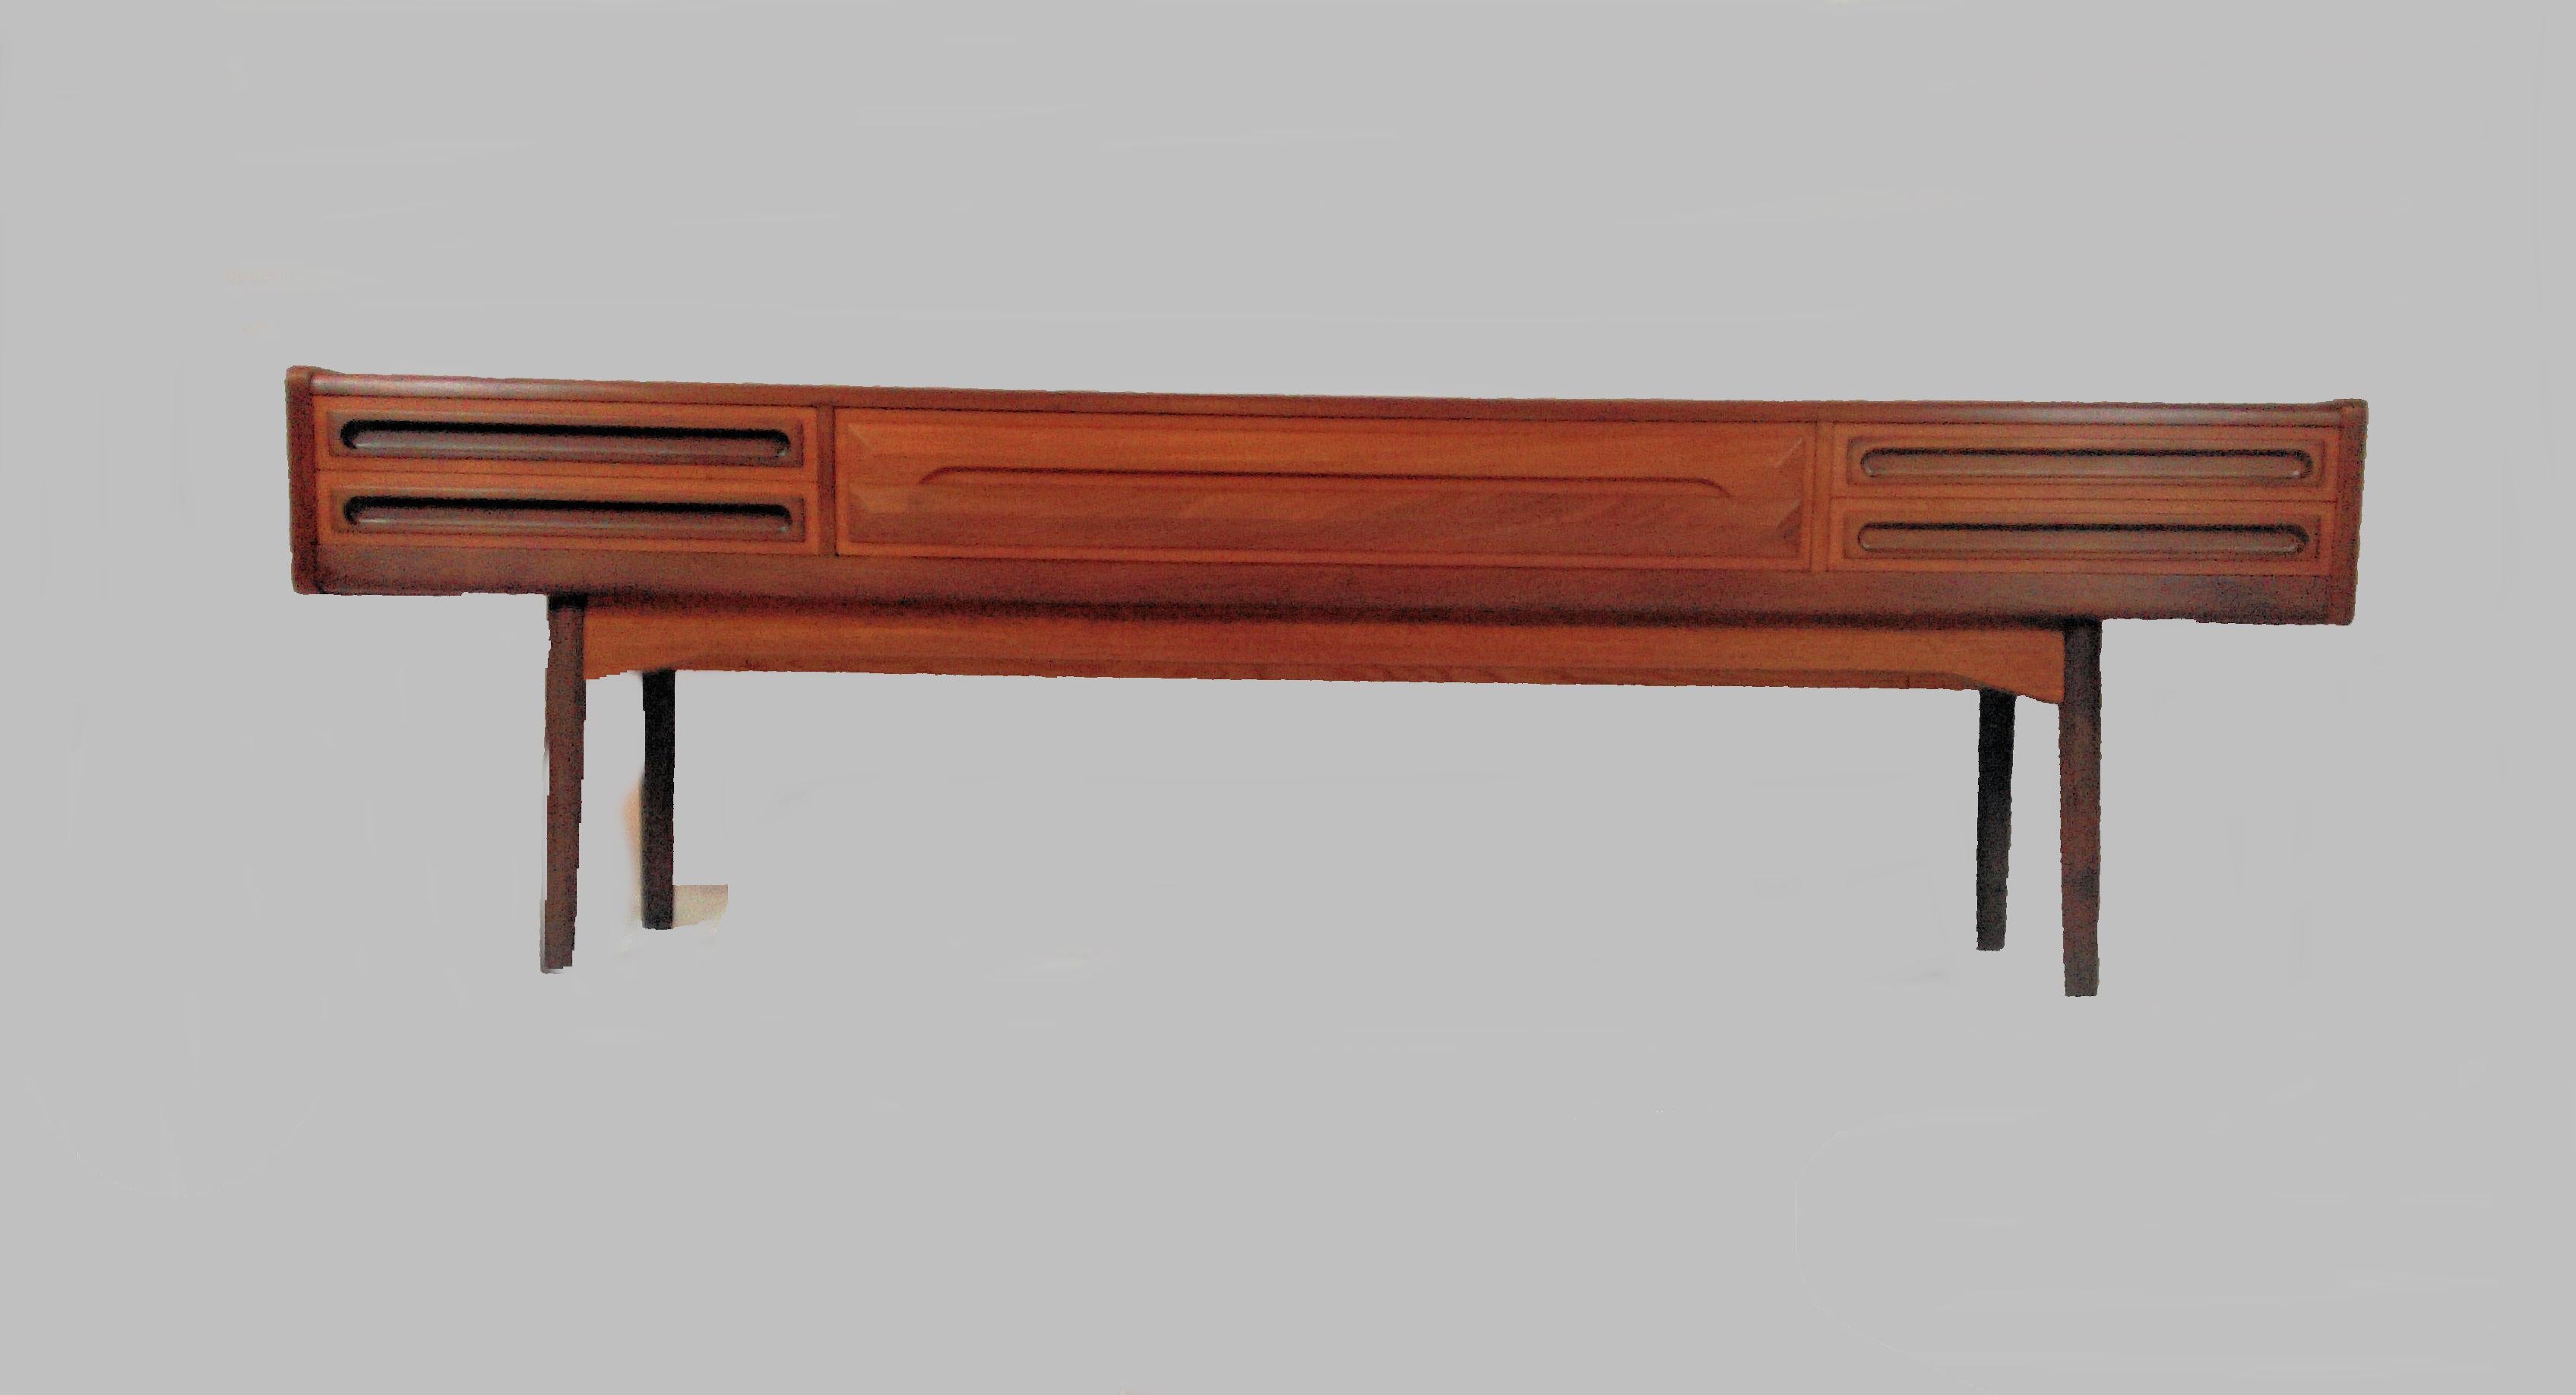 Danish teak sideboard from the 1960s.


The well made sideboard in elegant Danish modern style has been overlooked and refinished by our cabinetmaker and is in very good condition with only minimal signs of age and use.